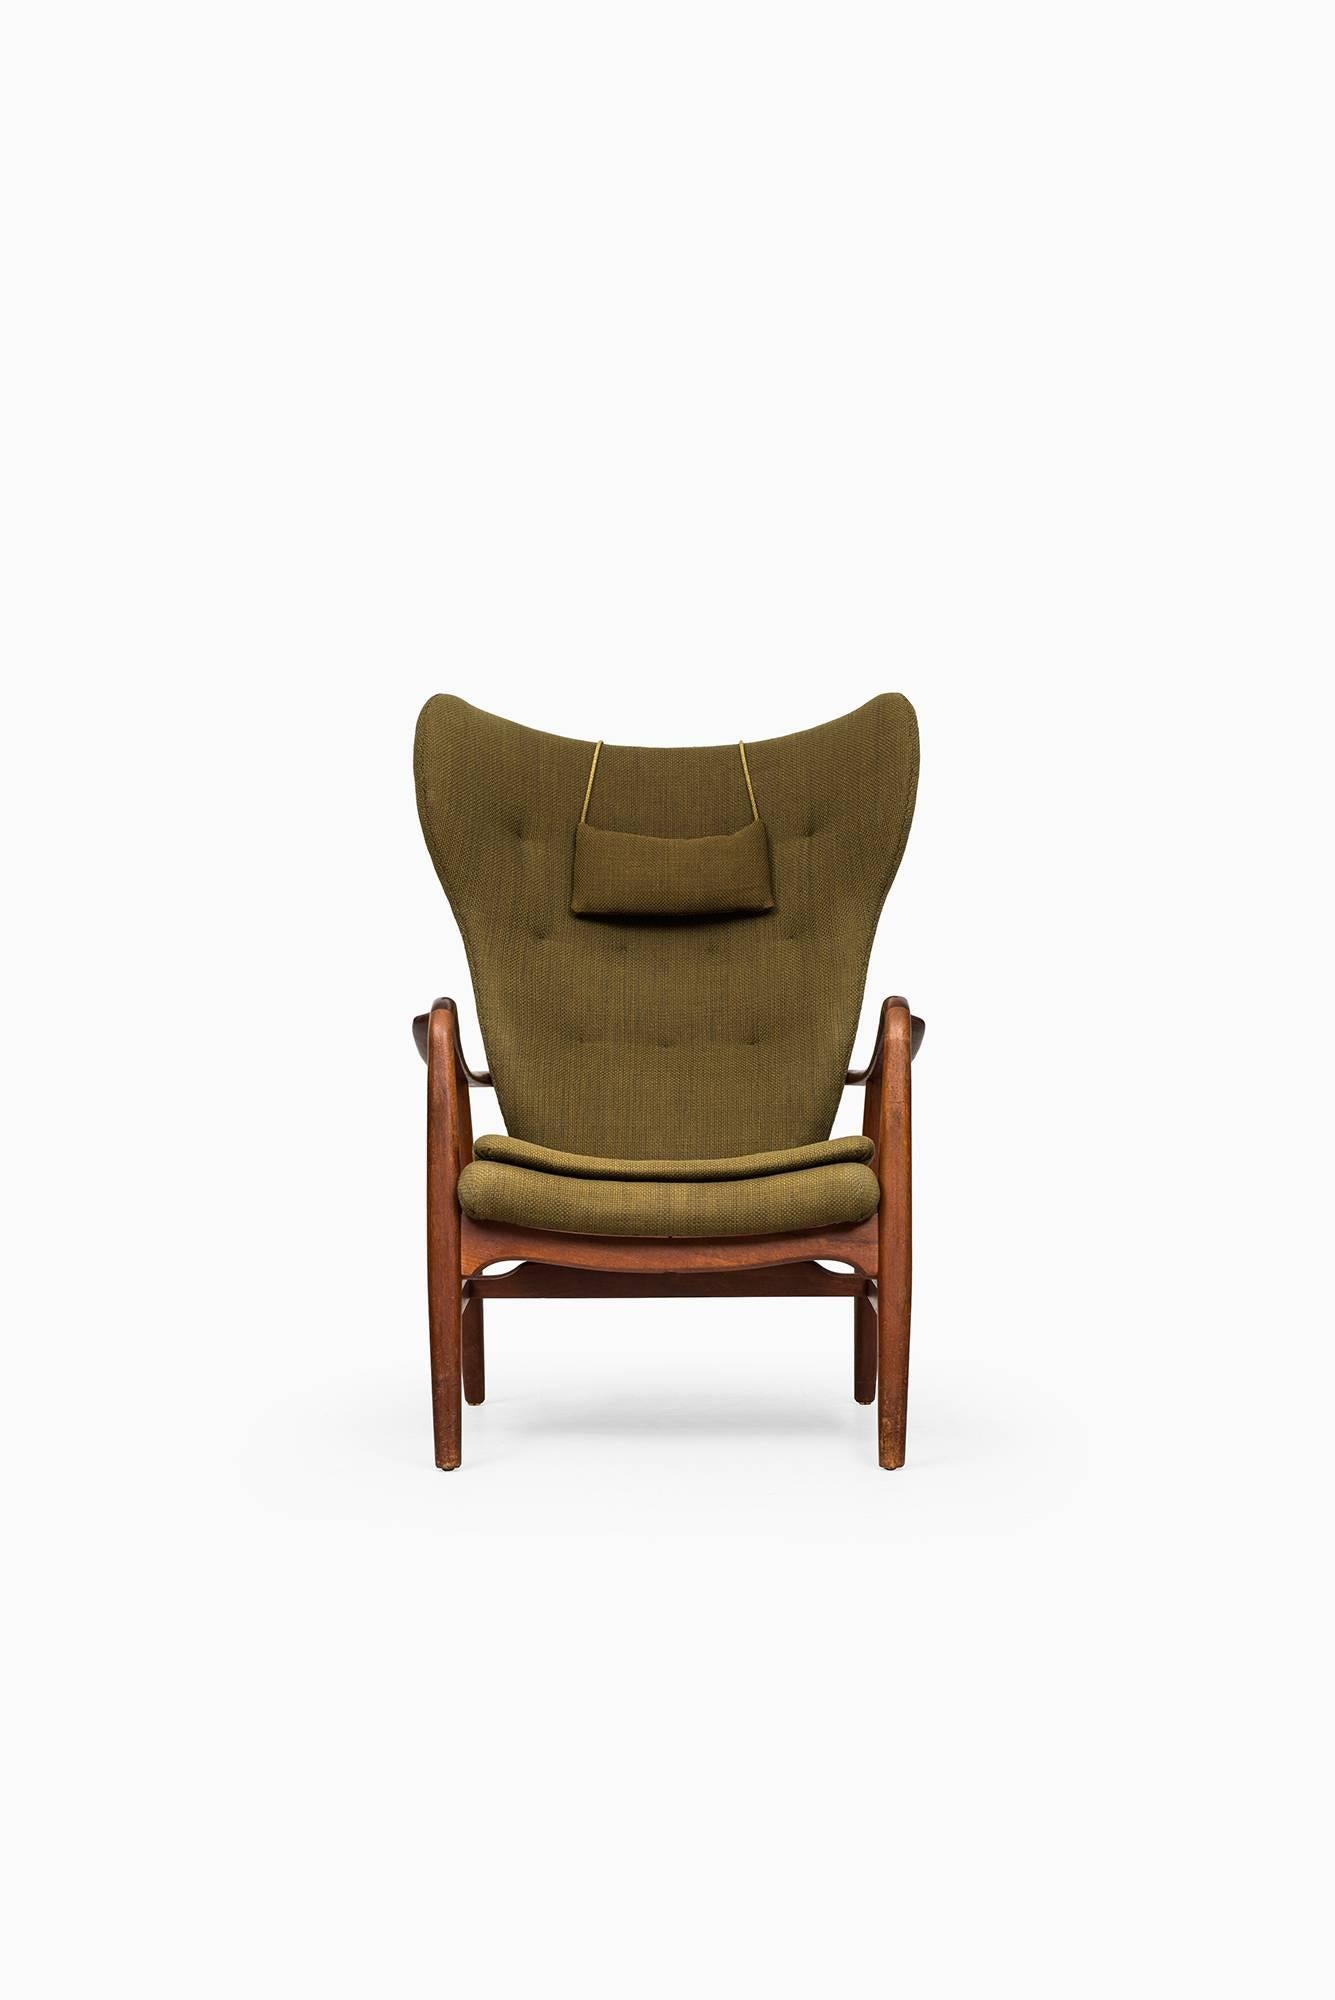 Rare wingbacked easy chair designed by Ib Madsen & Acton Schubell. Produced by Madsen & Schubell in Denmark.